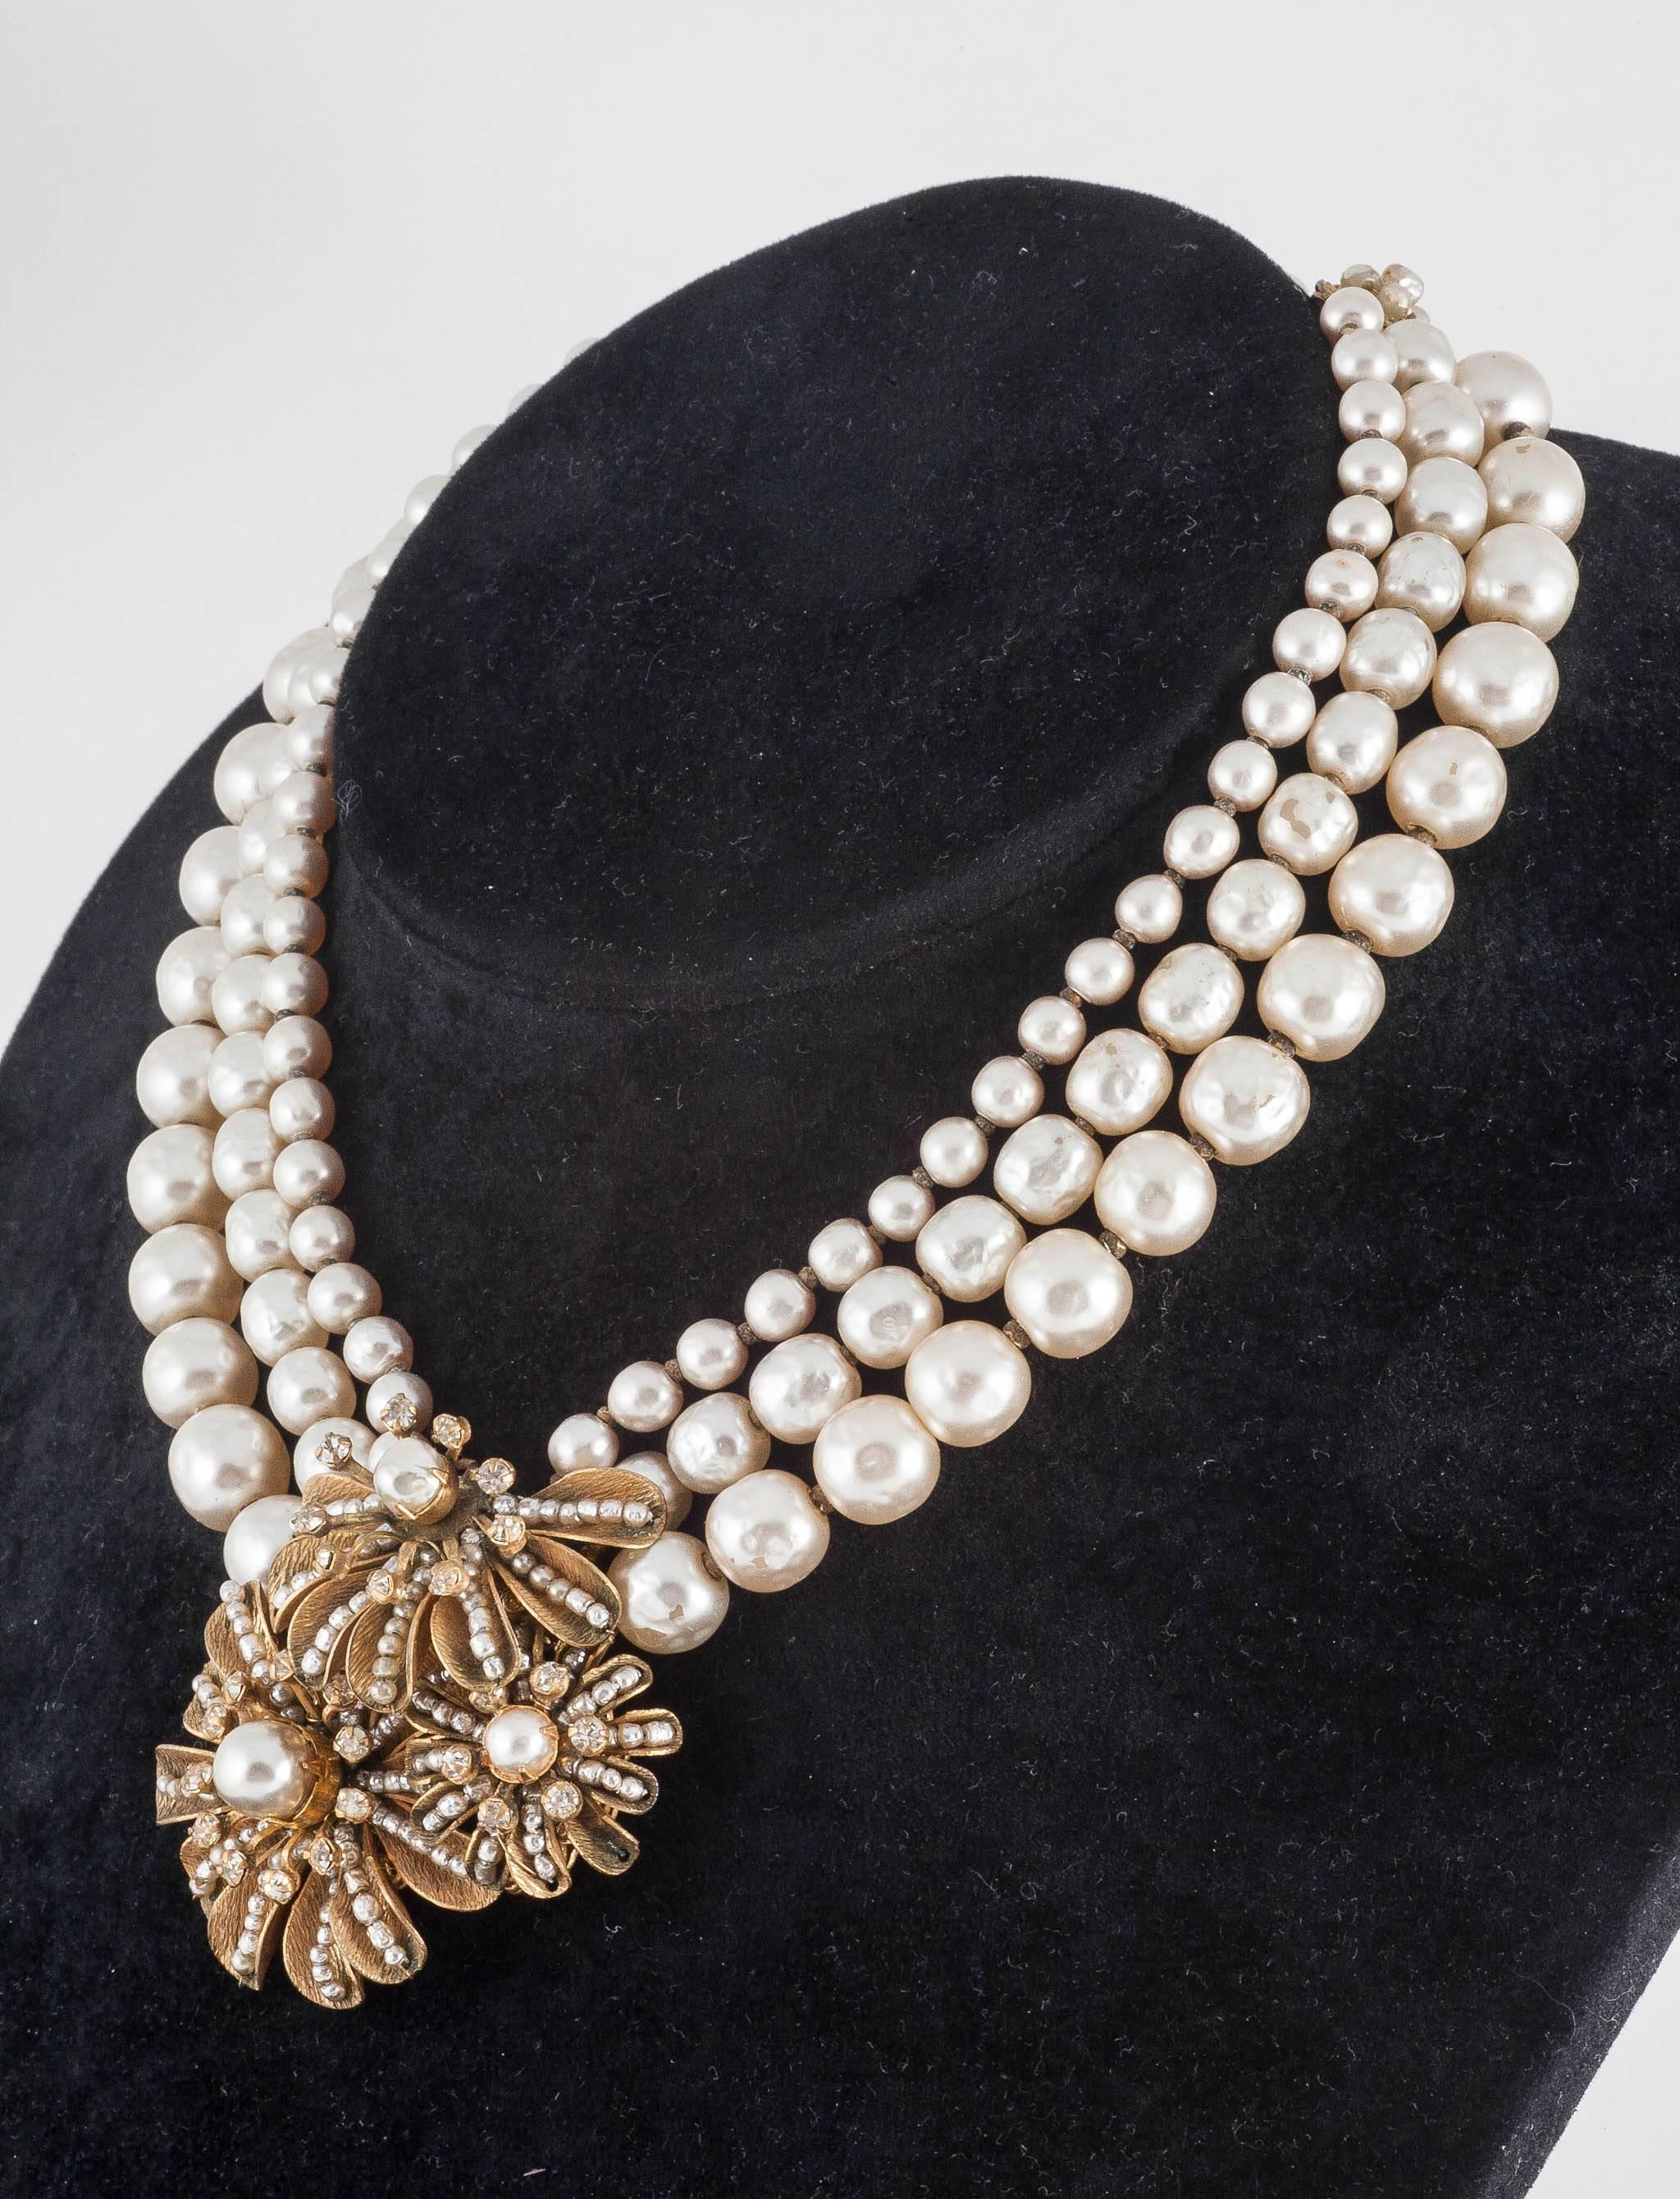 Women's Miriam Haskell three row baroque pearl necklace with  floral centrepiece